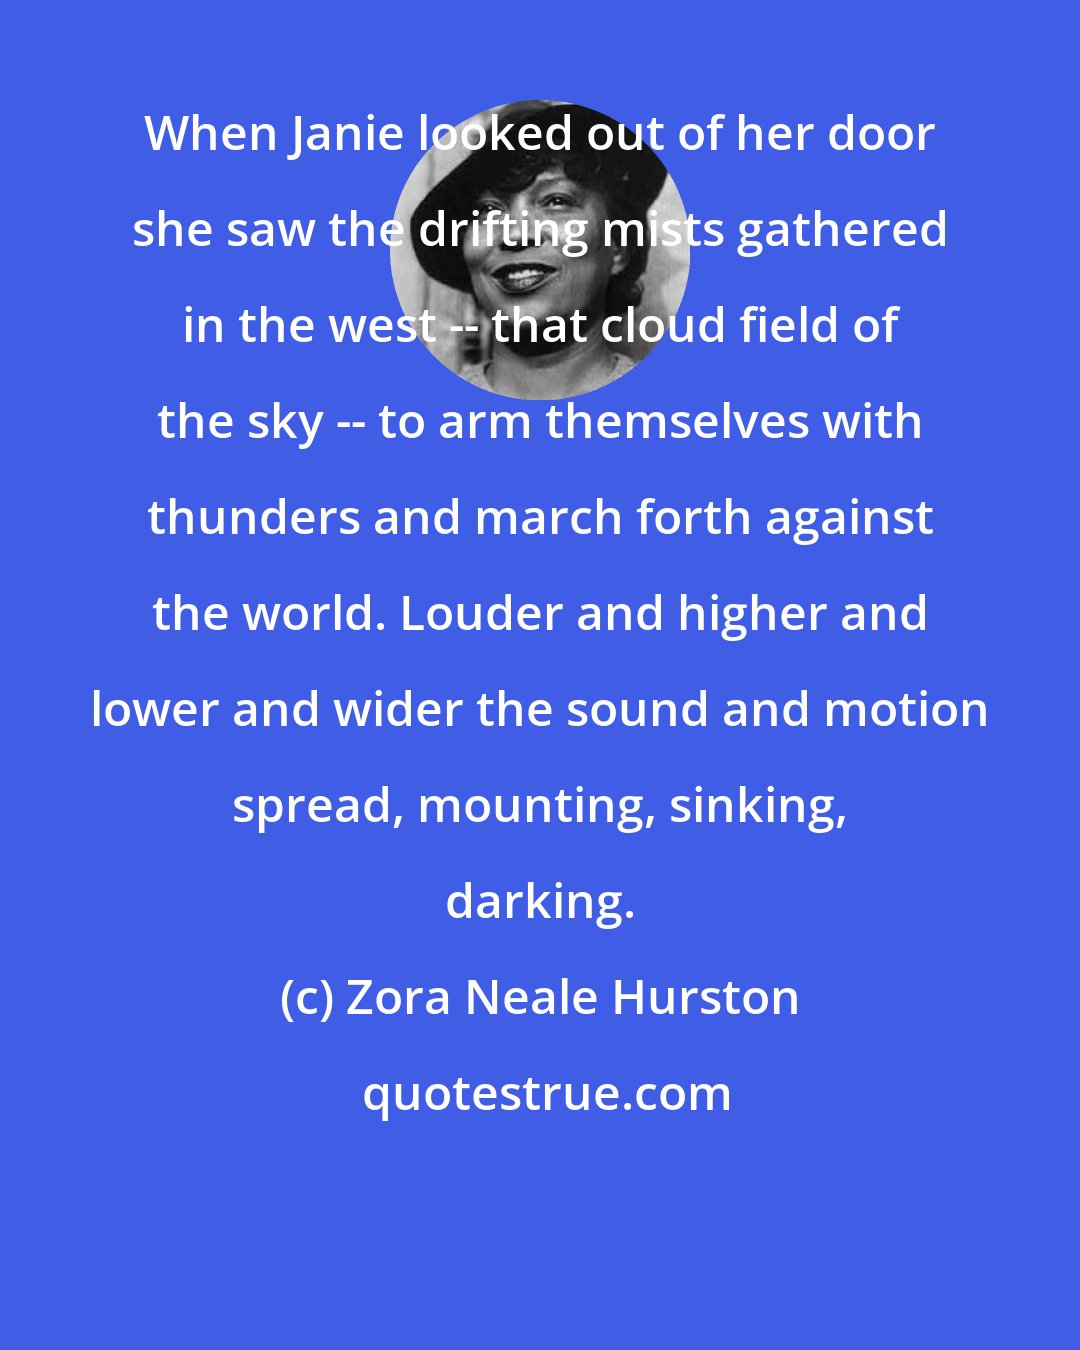 Zora Neale Hurston: When Janie looked out of her door she saw the drifting mists gathered in the west -- that cloud field of the sky -- to arm themselves with thunders and march forth against the world. Louder and higher and lower and wider the sound and motion spread, mounting, sinking, darking.